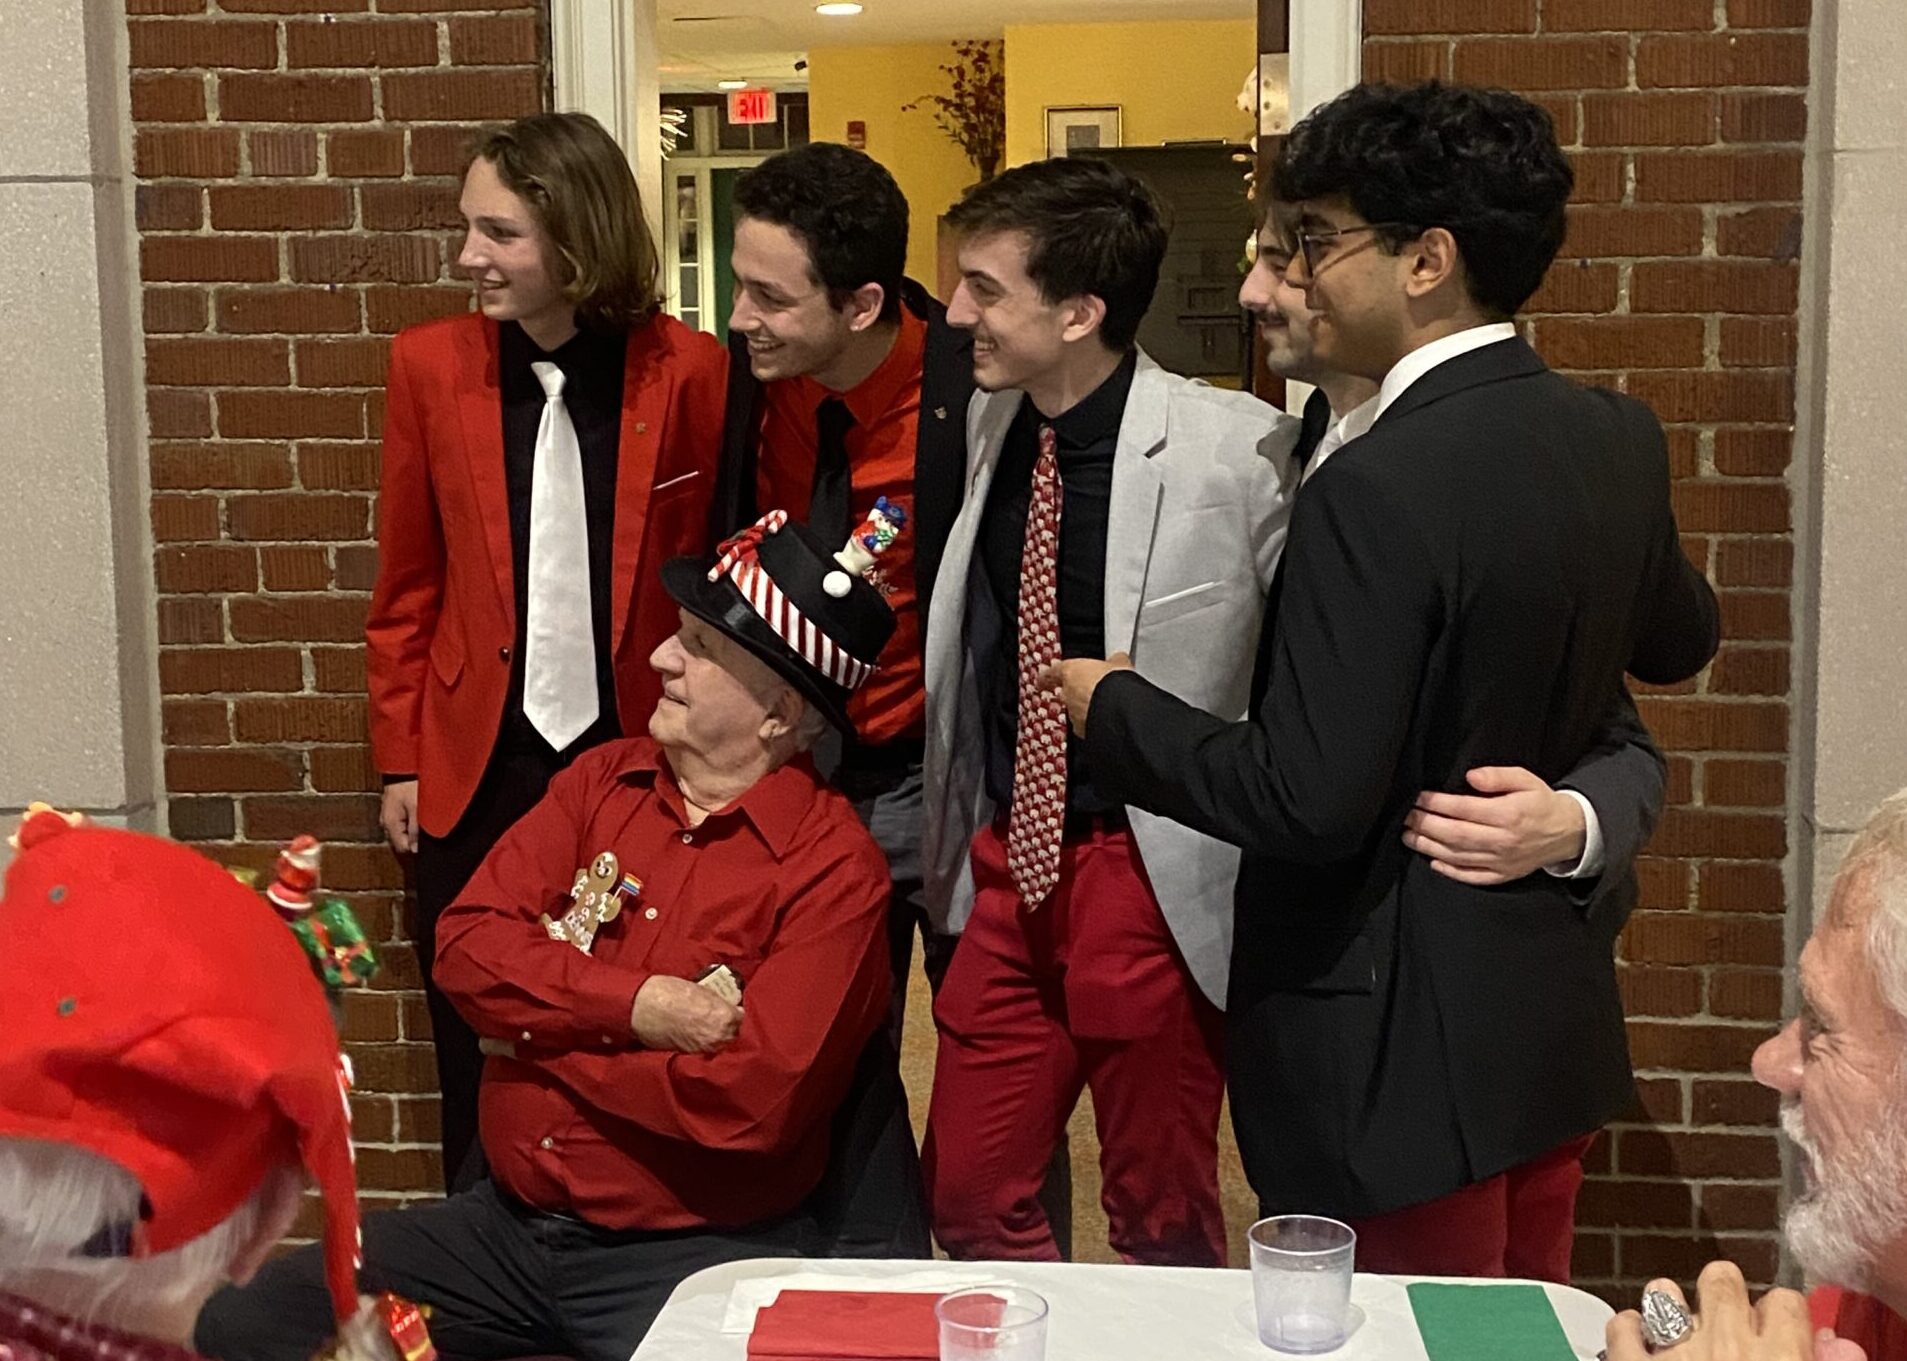 Ethos’ Out4Supper for LGBTQ+ Seniors – Holiday Party with Tufts Beelzebubs